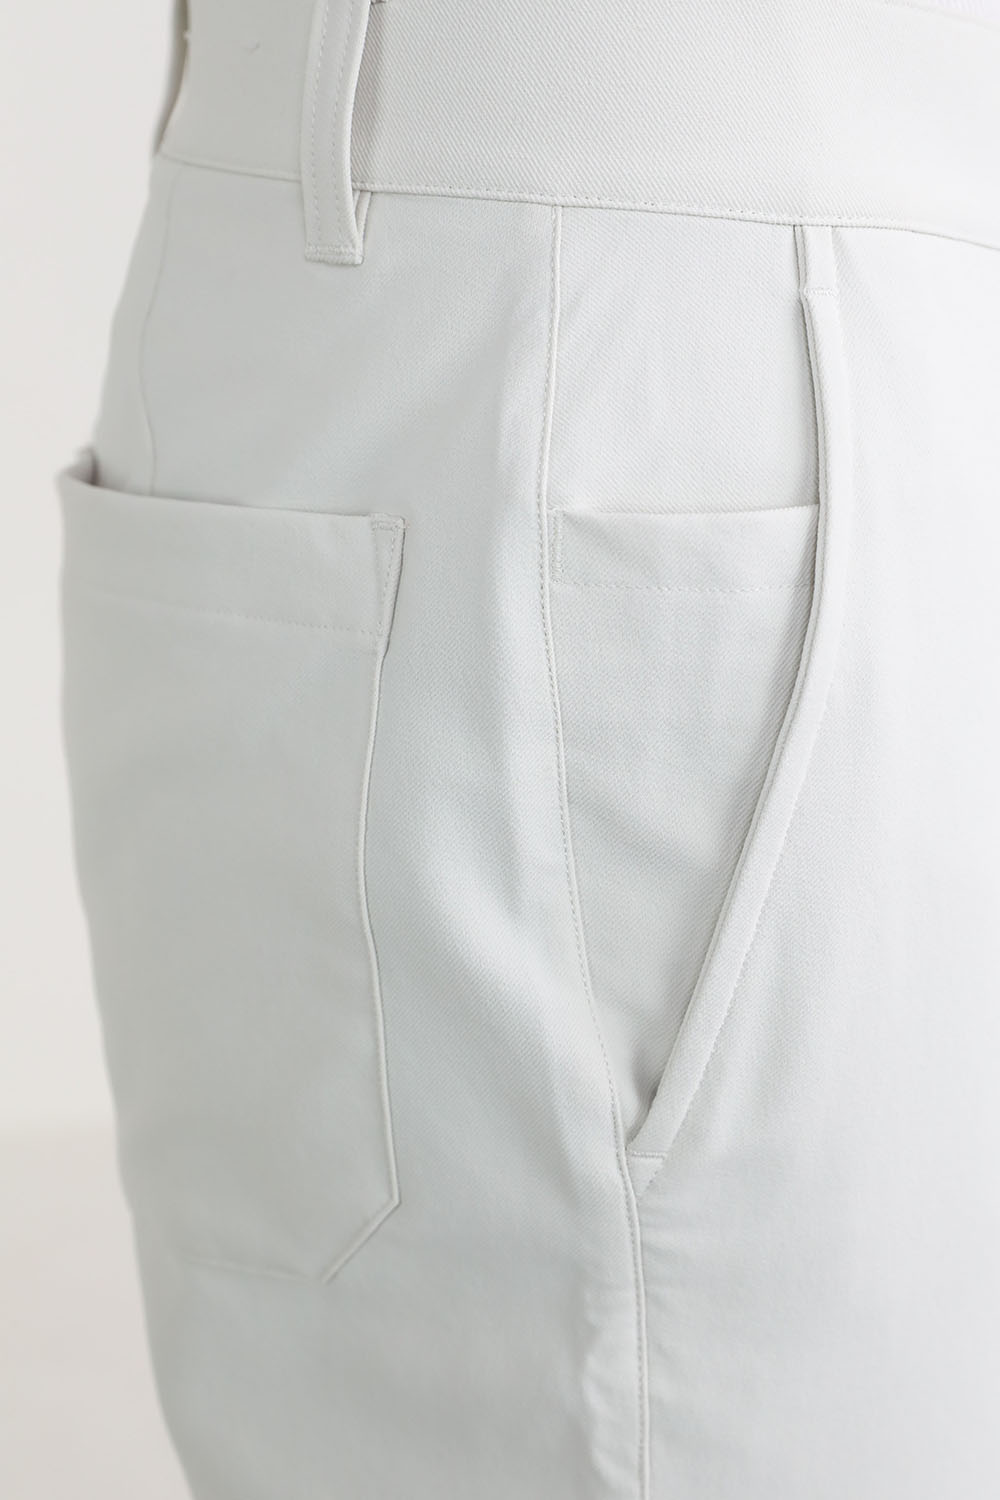 Slim-Tapered Twill Trouser *Cropped LULULEMON